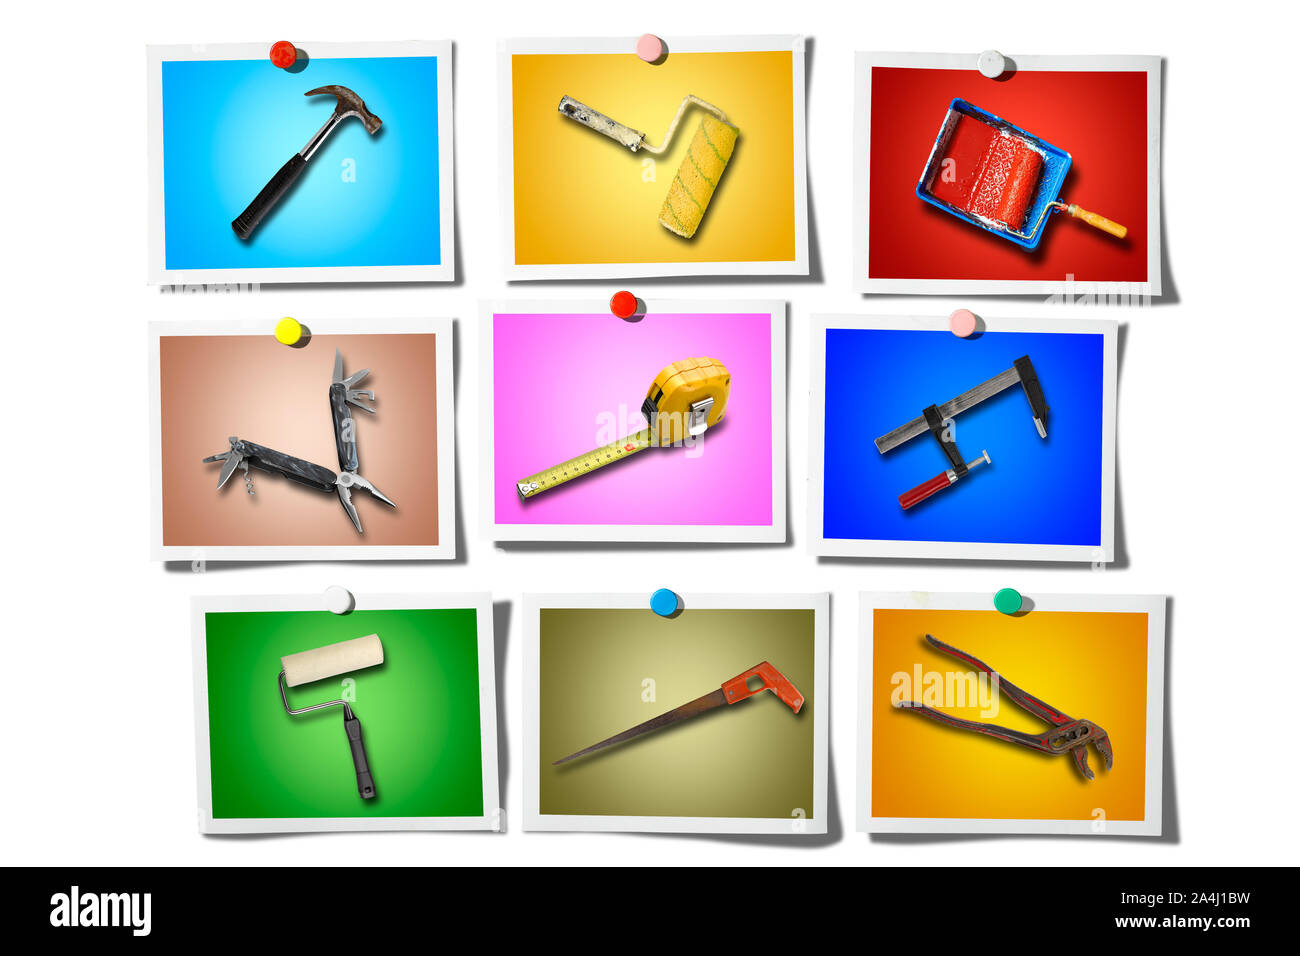 Instant photo on White background and Set of work tools isolated on colored background Stock Photo